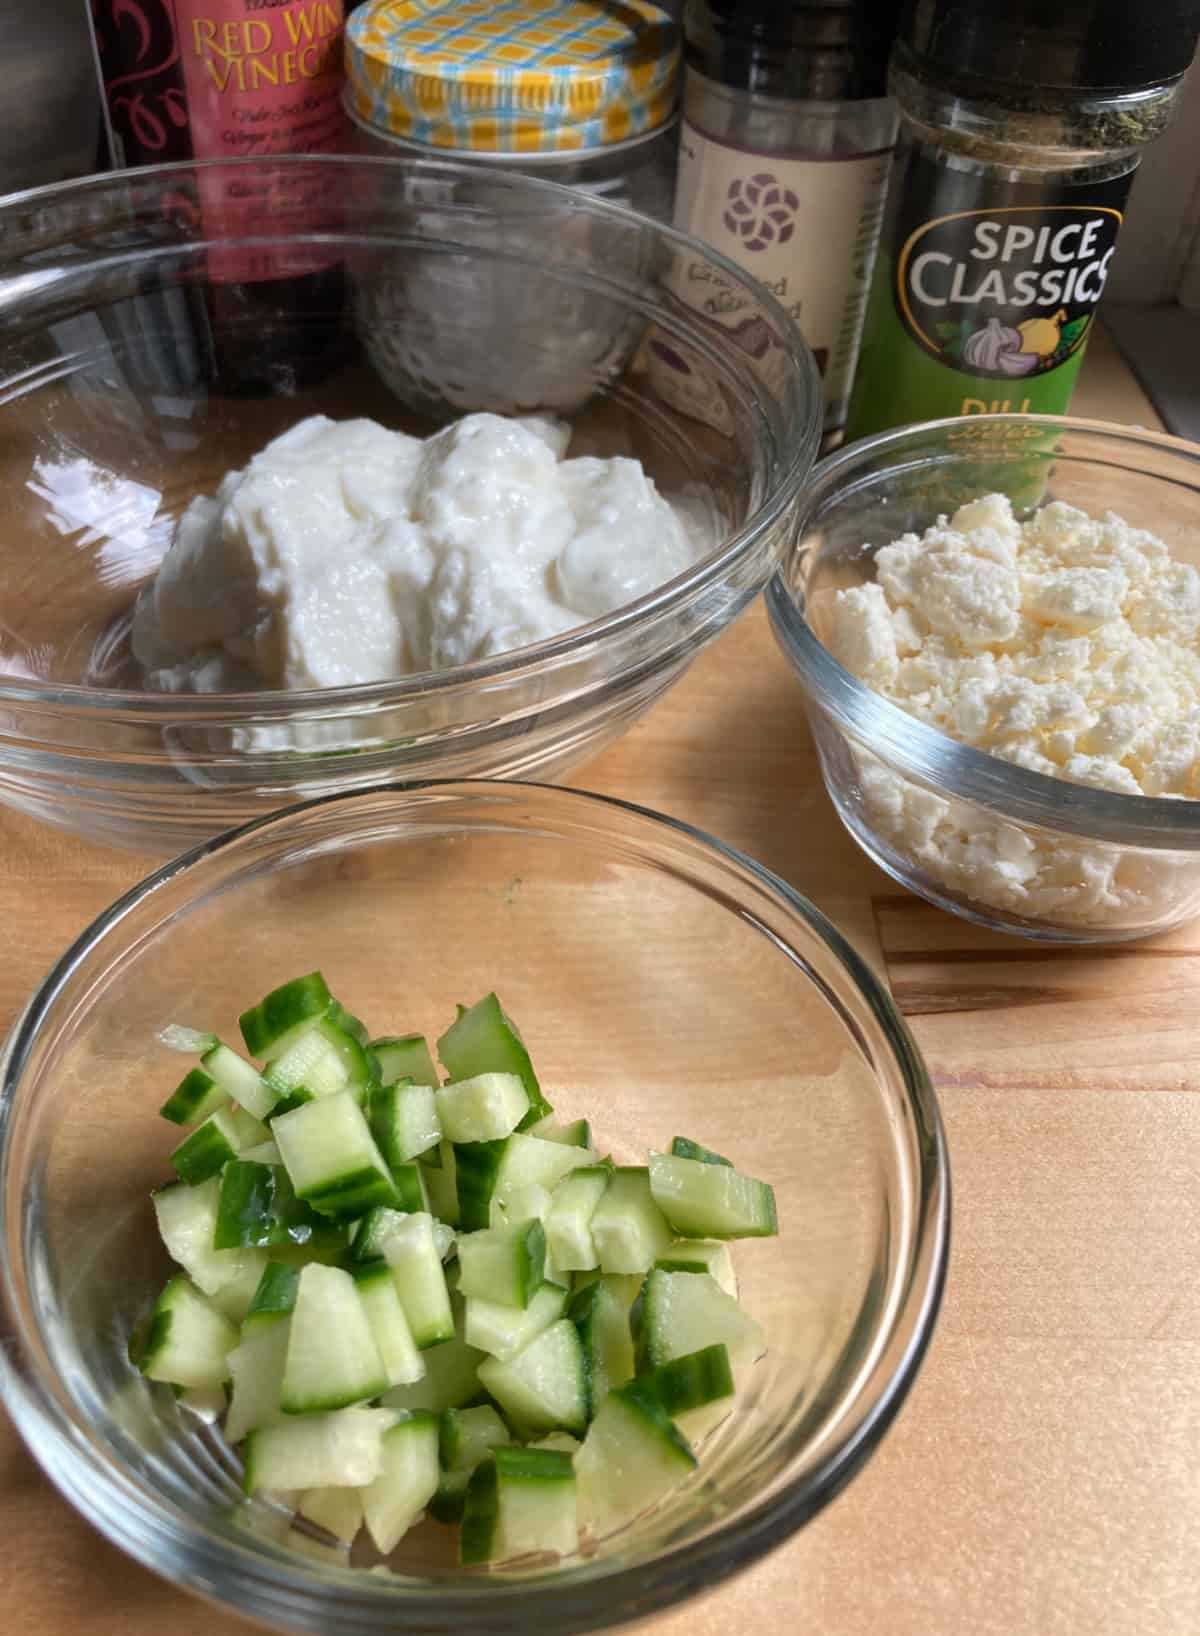 Ingredients for making salad dressing, including chopped cucumbers, feta, Greek yogurt and spices.